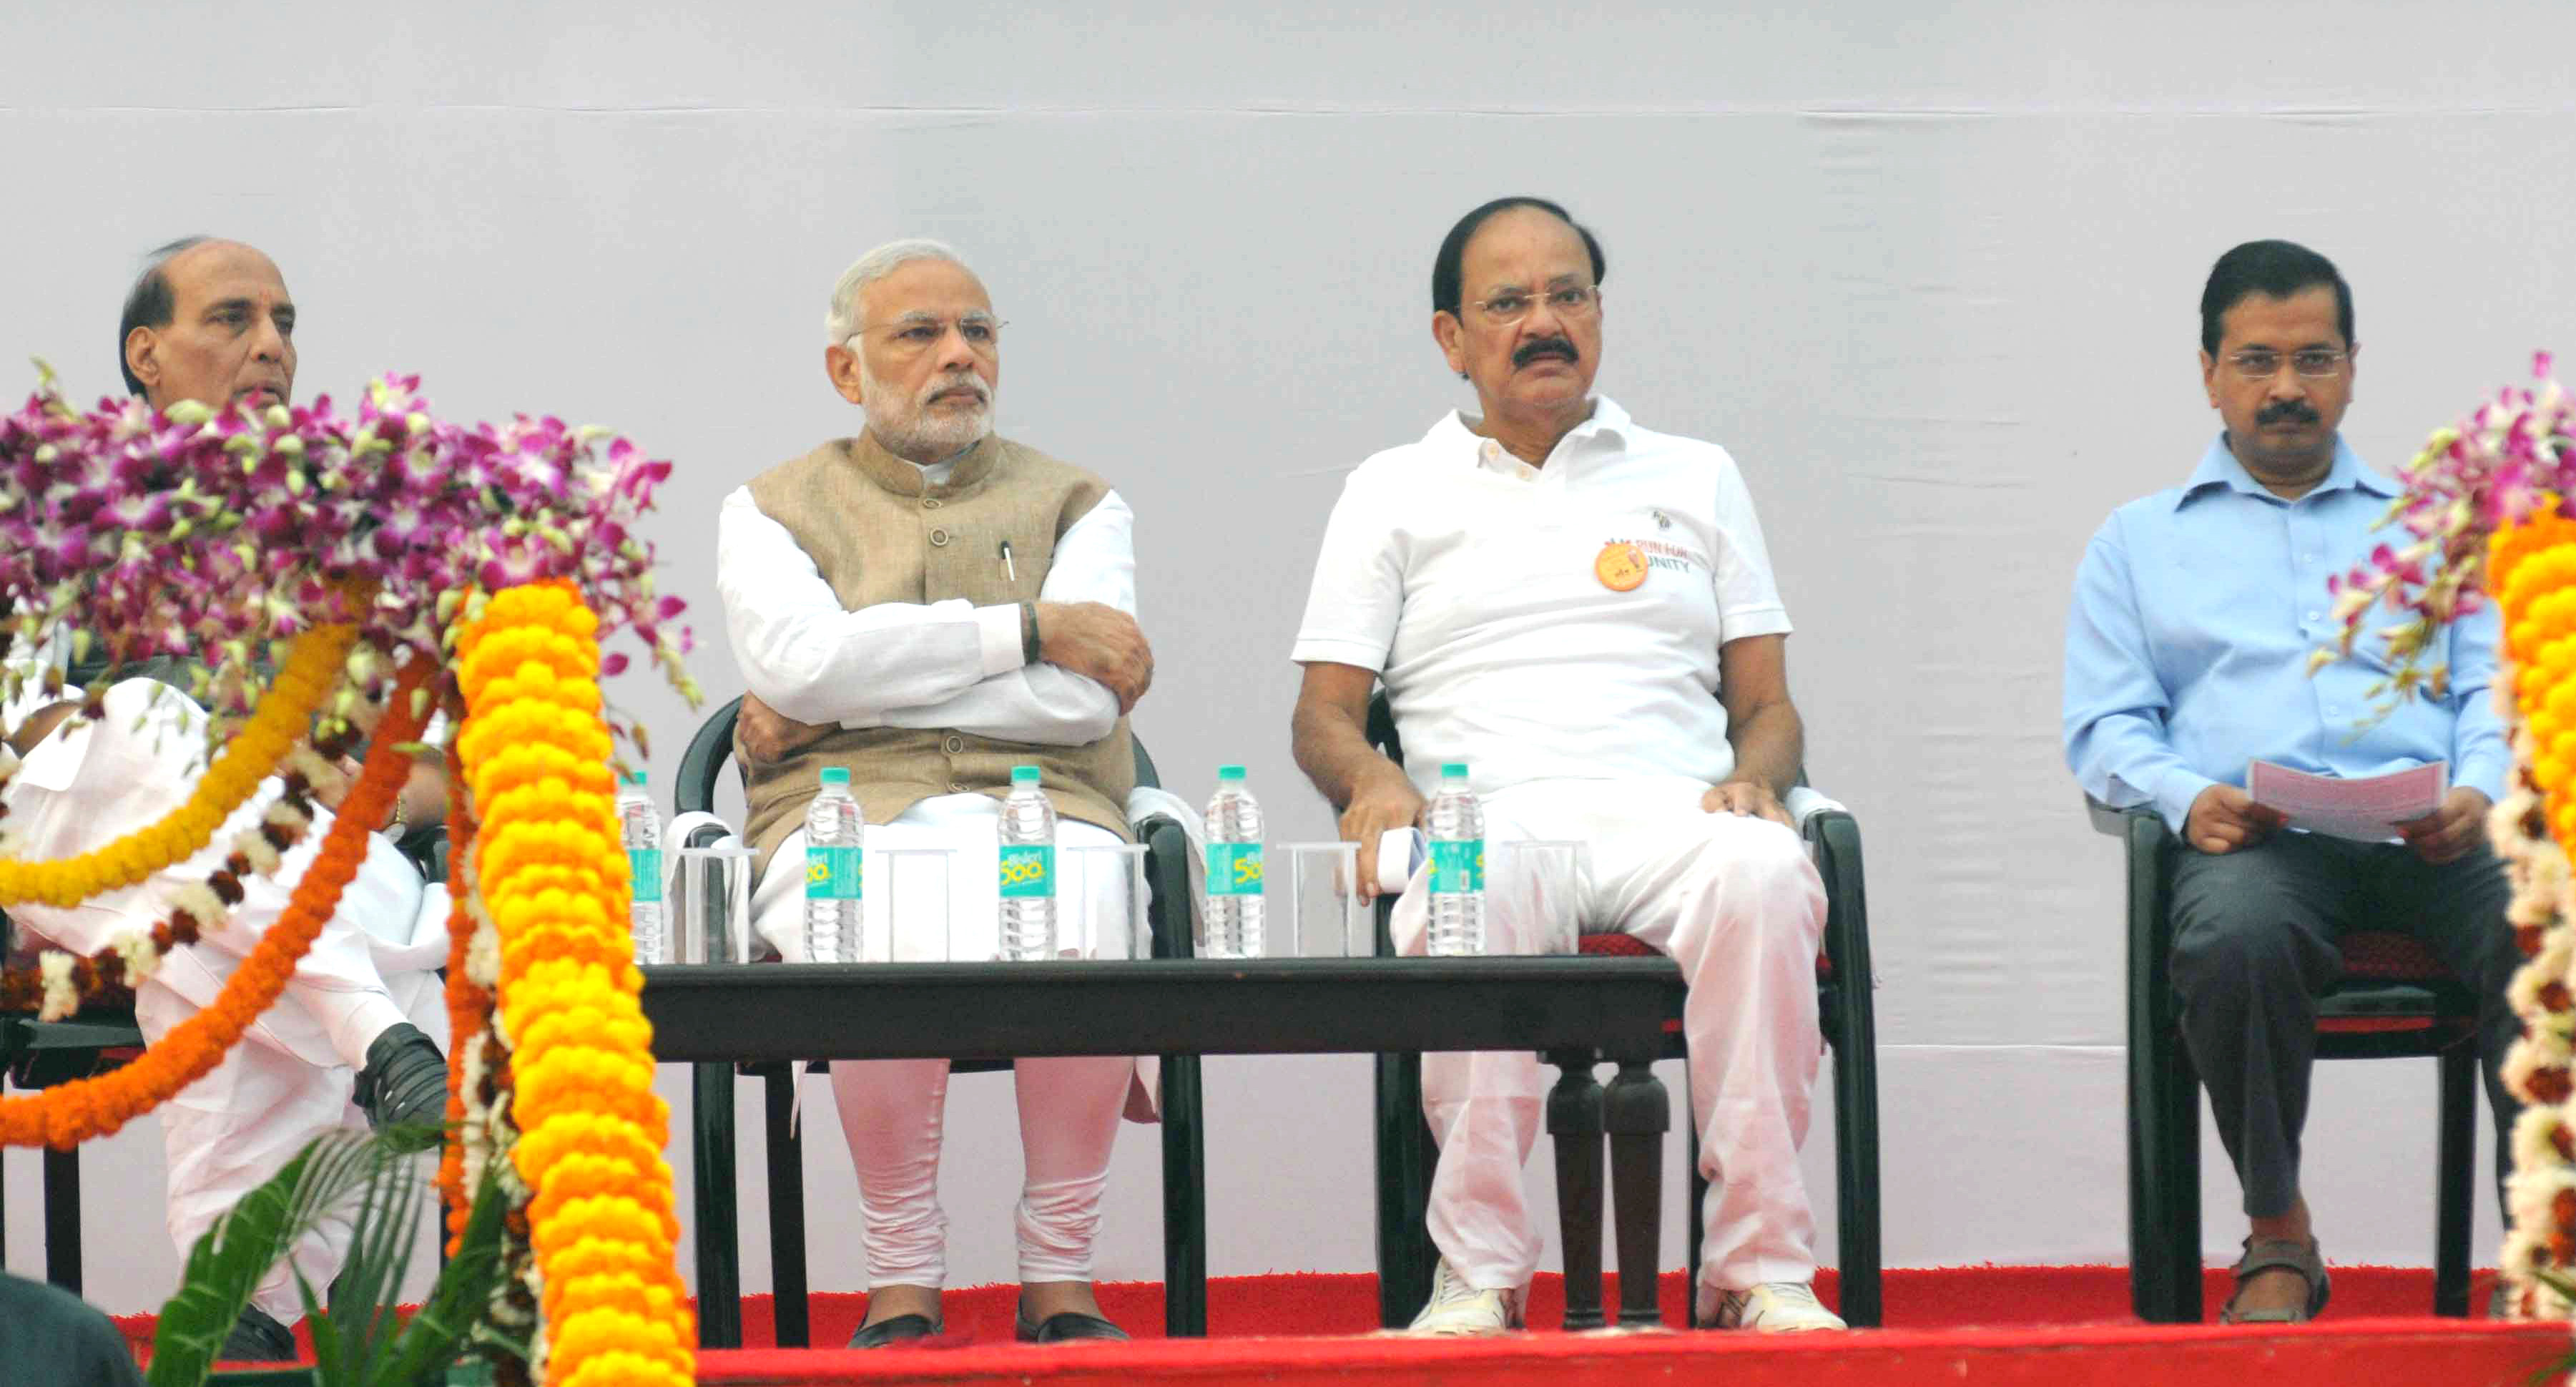 The Prime Minister, Shri Narendra Modi at the Run for Unity event, organised on Rashtriya Ekta Diwas, at Rajpath, in New Delhi on October 31, 2015.  The Union Home Minister, Shri Rajnath Singh, the Union Minister for Urban Development, Housing and Urban Poverty Alleviation and Parliamentary Affairs, Shri M. Venkaiah Naidu and the Chief Minister of Delhi, Shri Arvind Kejriwal are also seen.